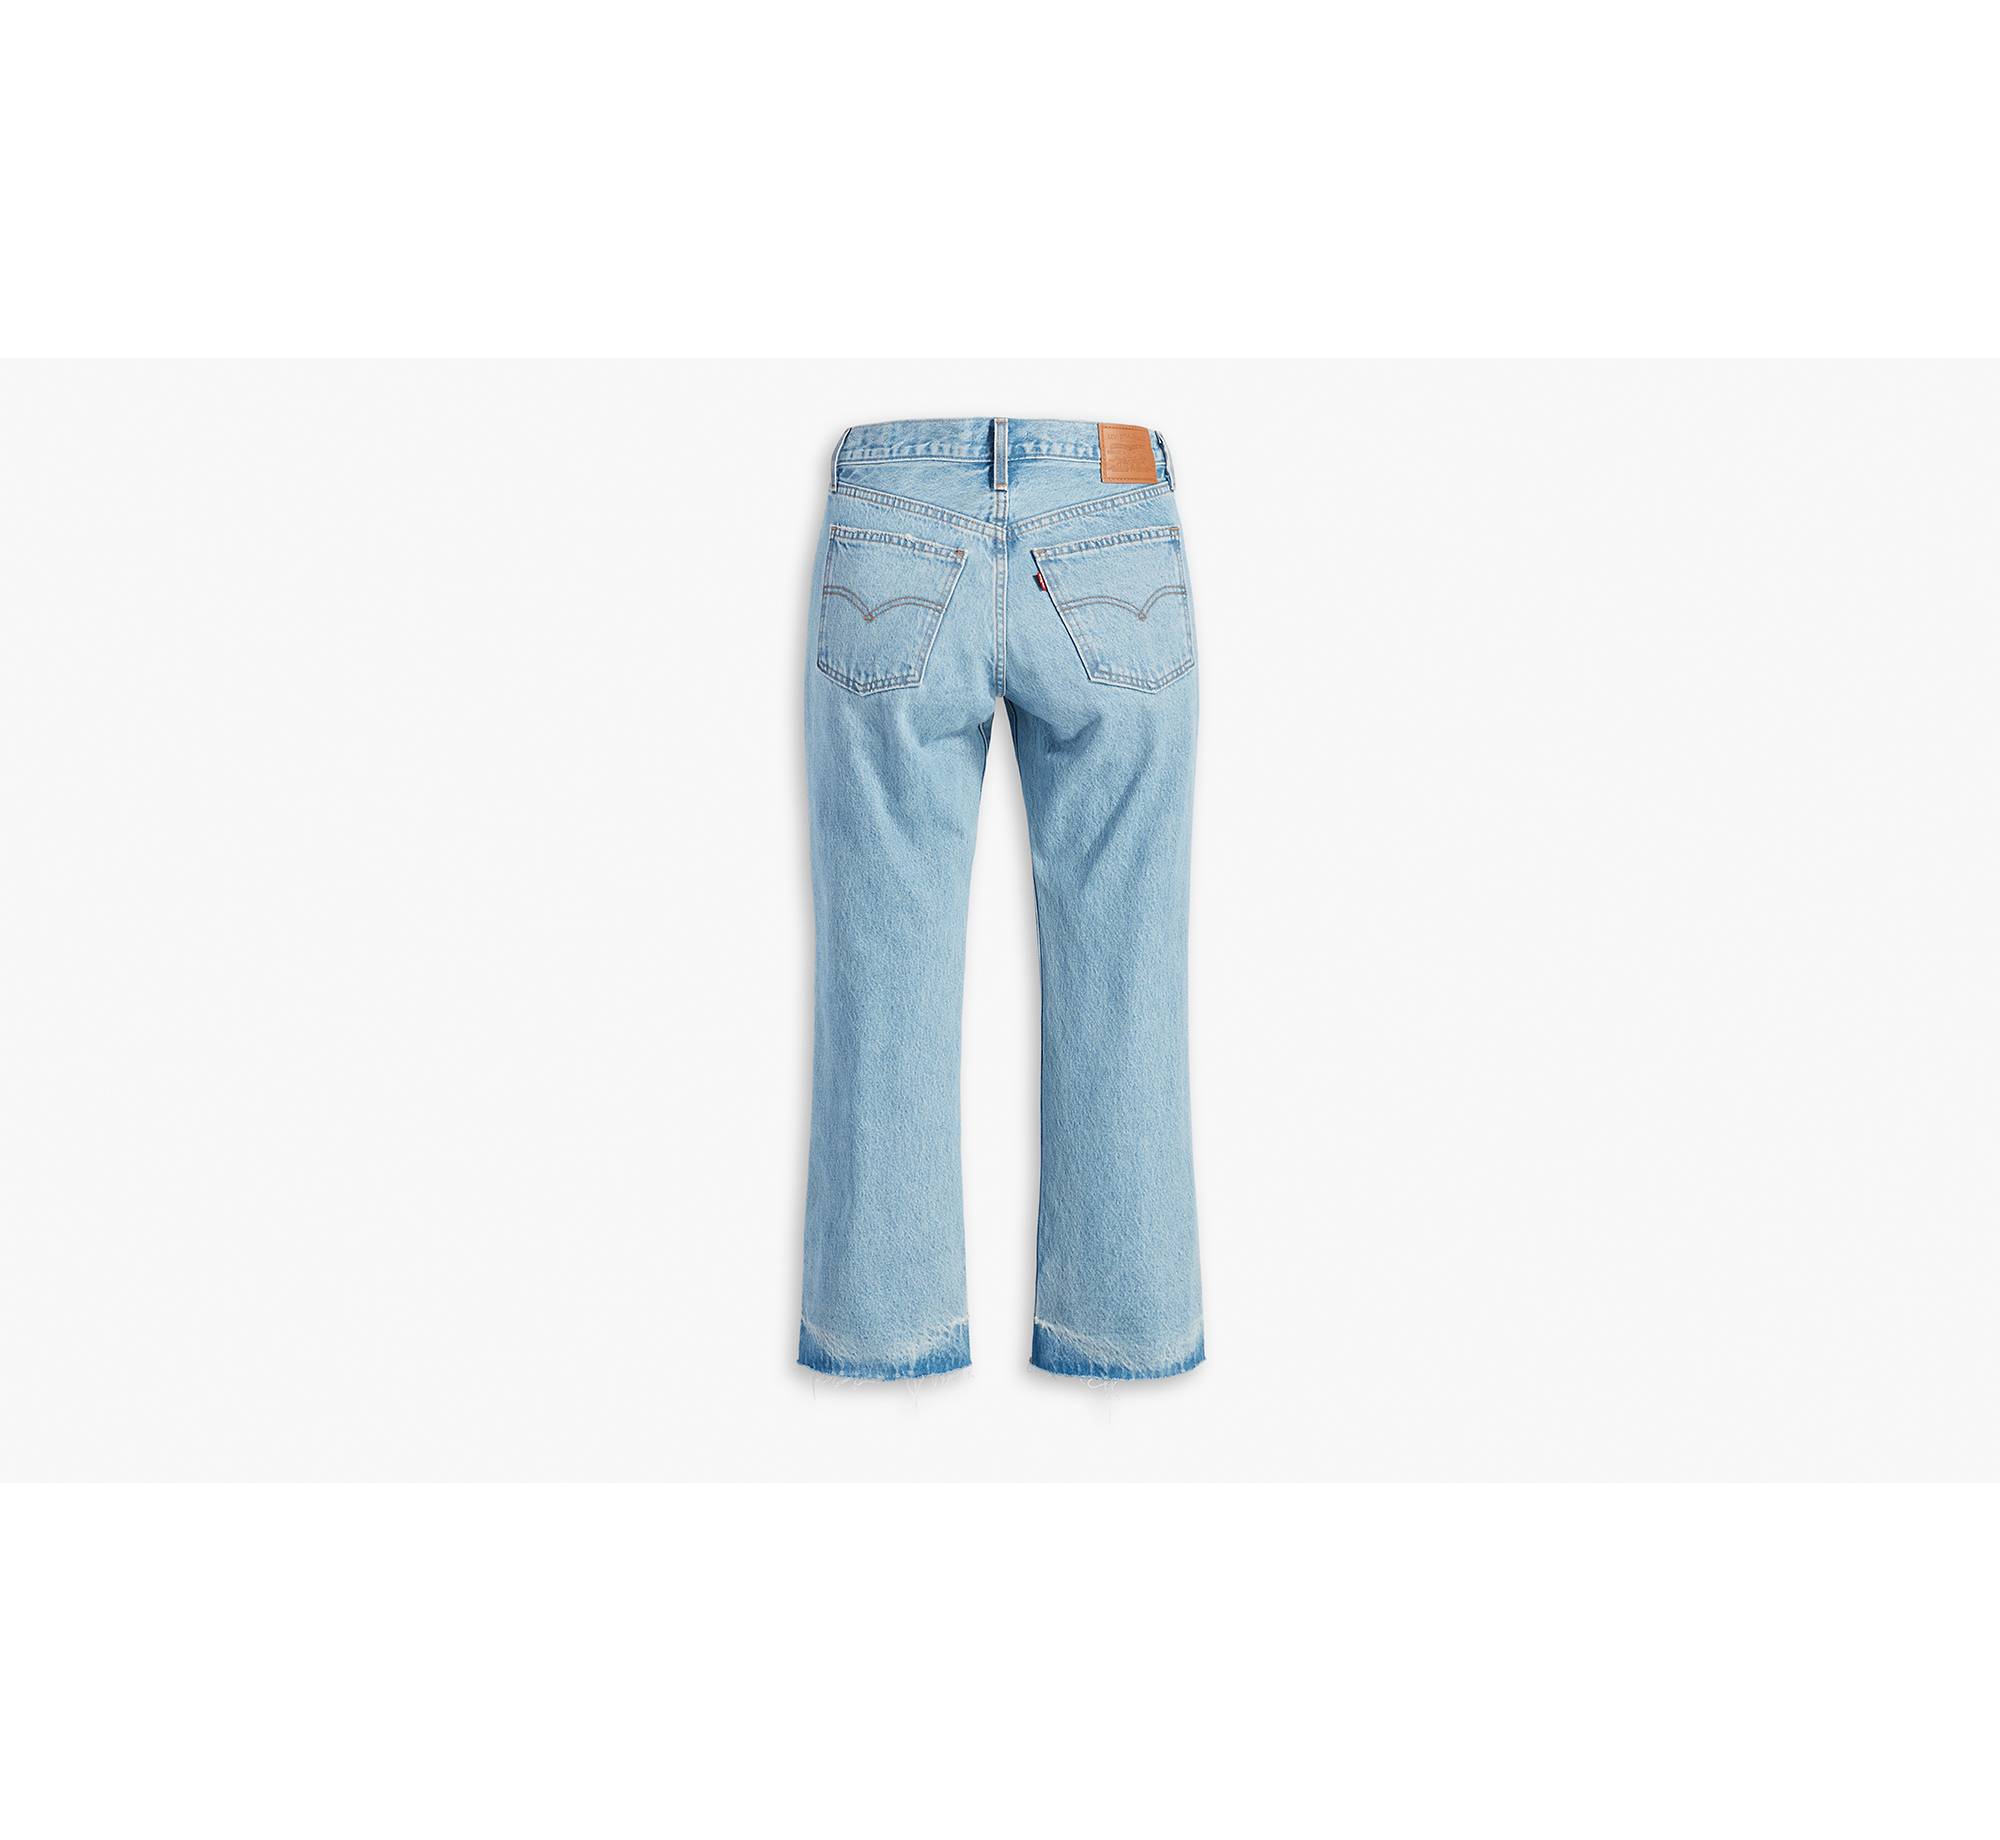 Middy Bootcut Women's Jeans - Medium Wash | Levi's® US